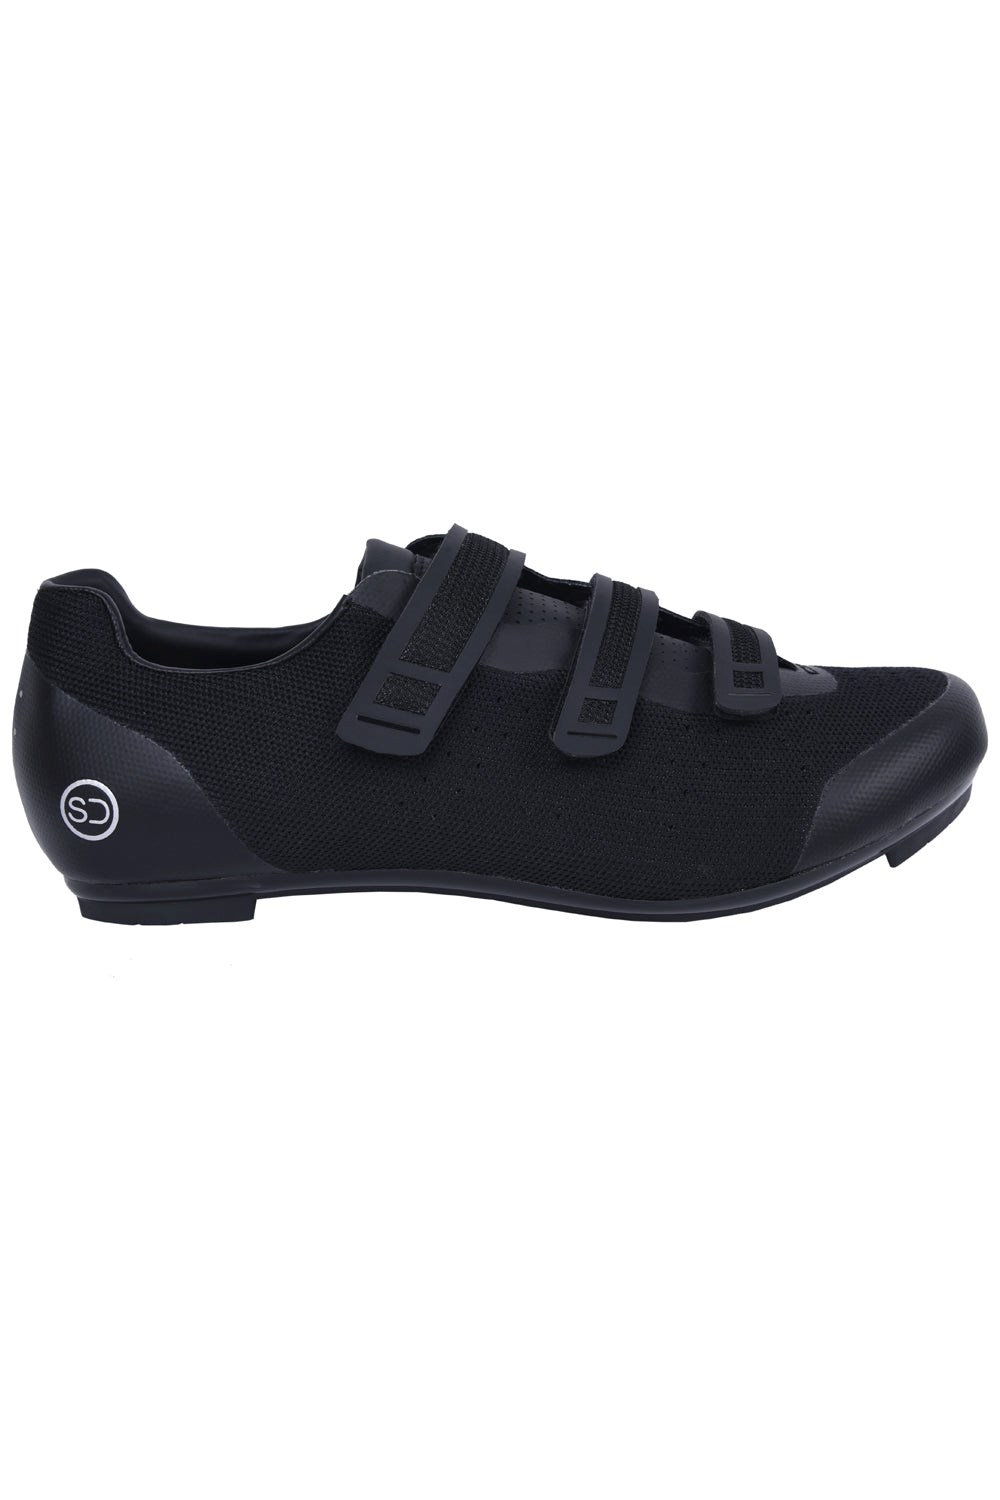 S-GT4 Mens Knit Road Cycle Shoes -